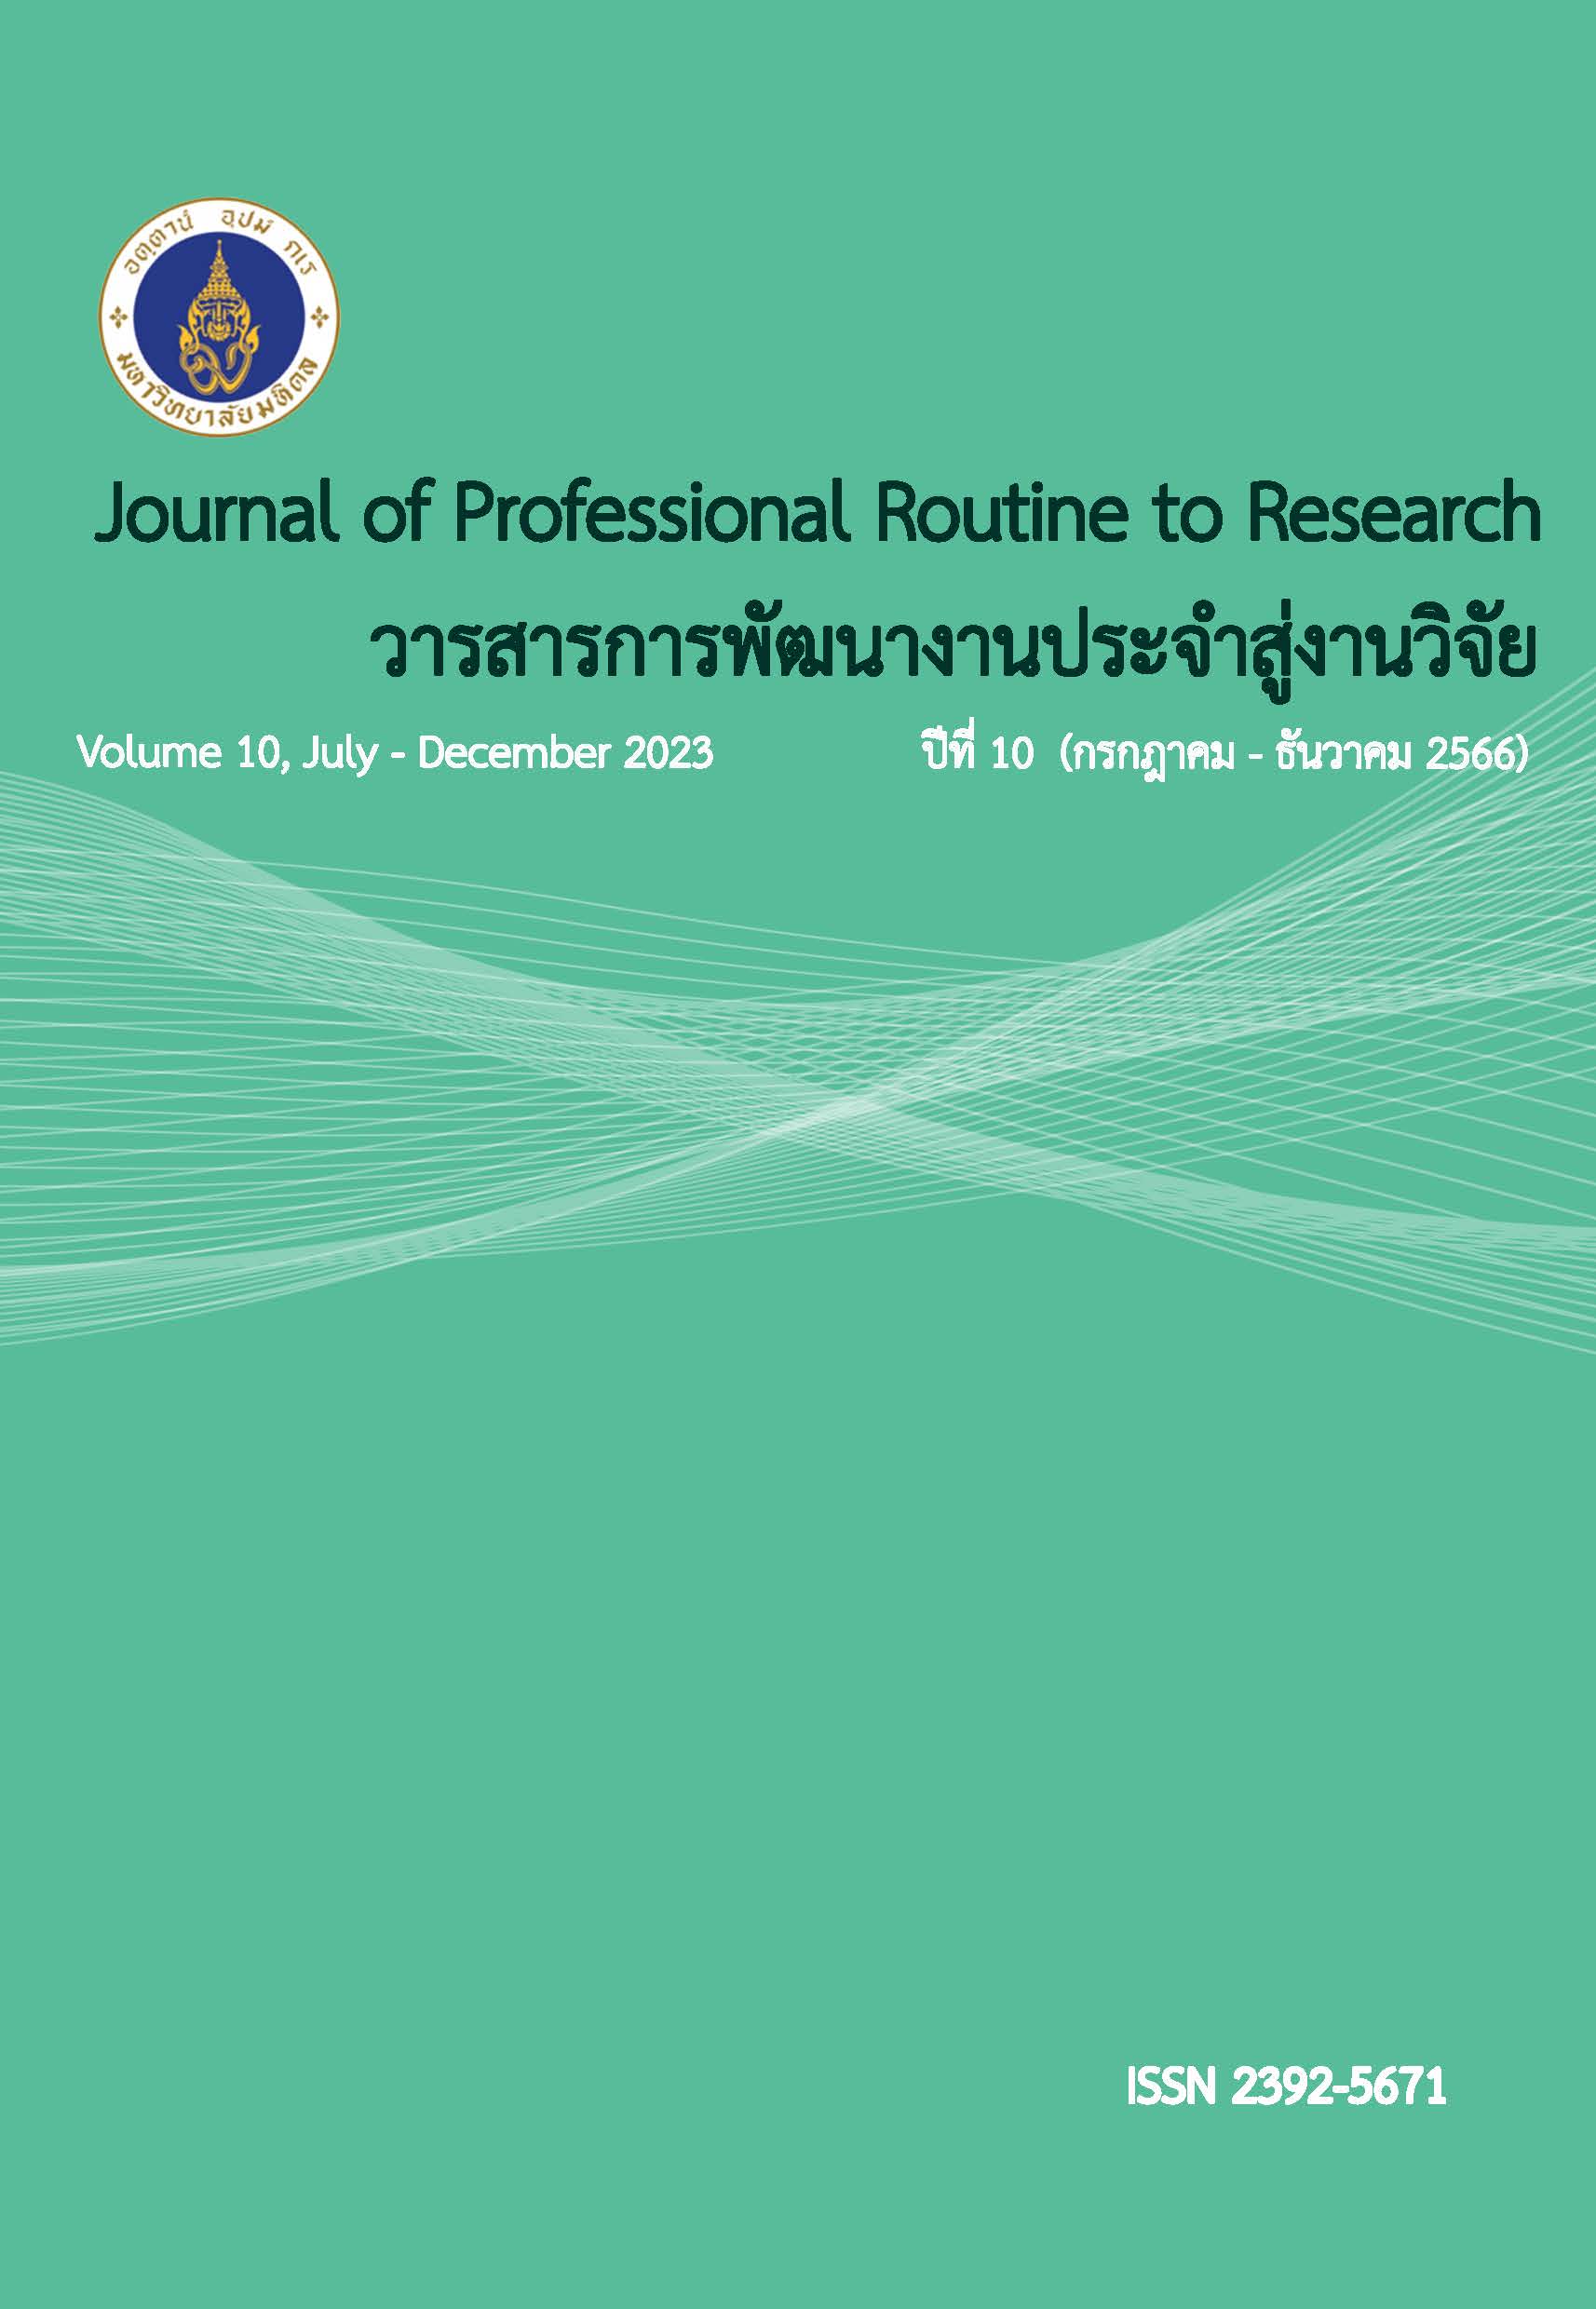 					View Vol. 10 No. 2 (2023): Journal of Professional Routine to Research (JPR2R)
				